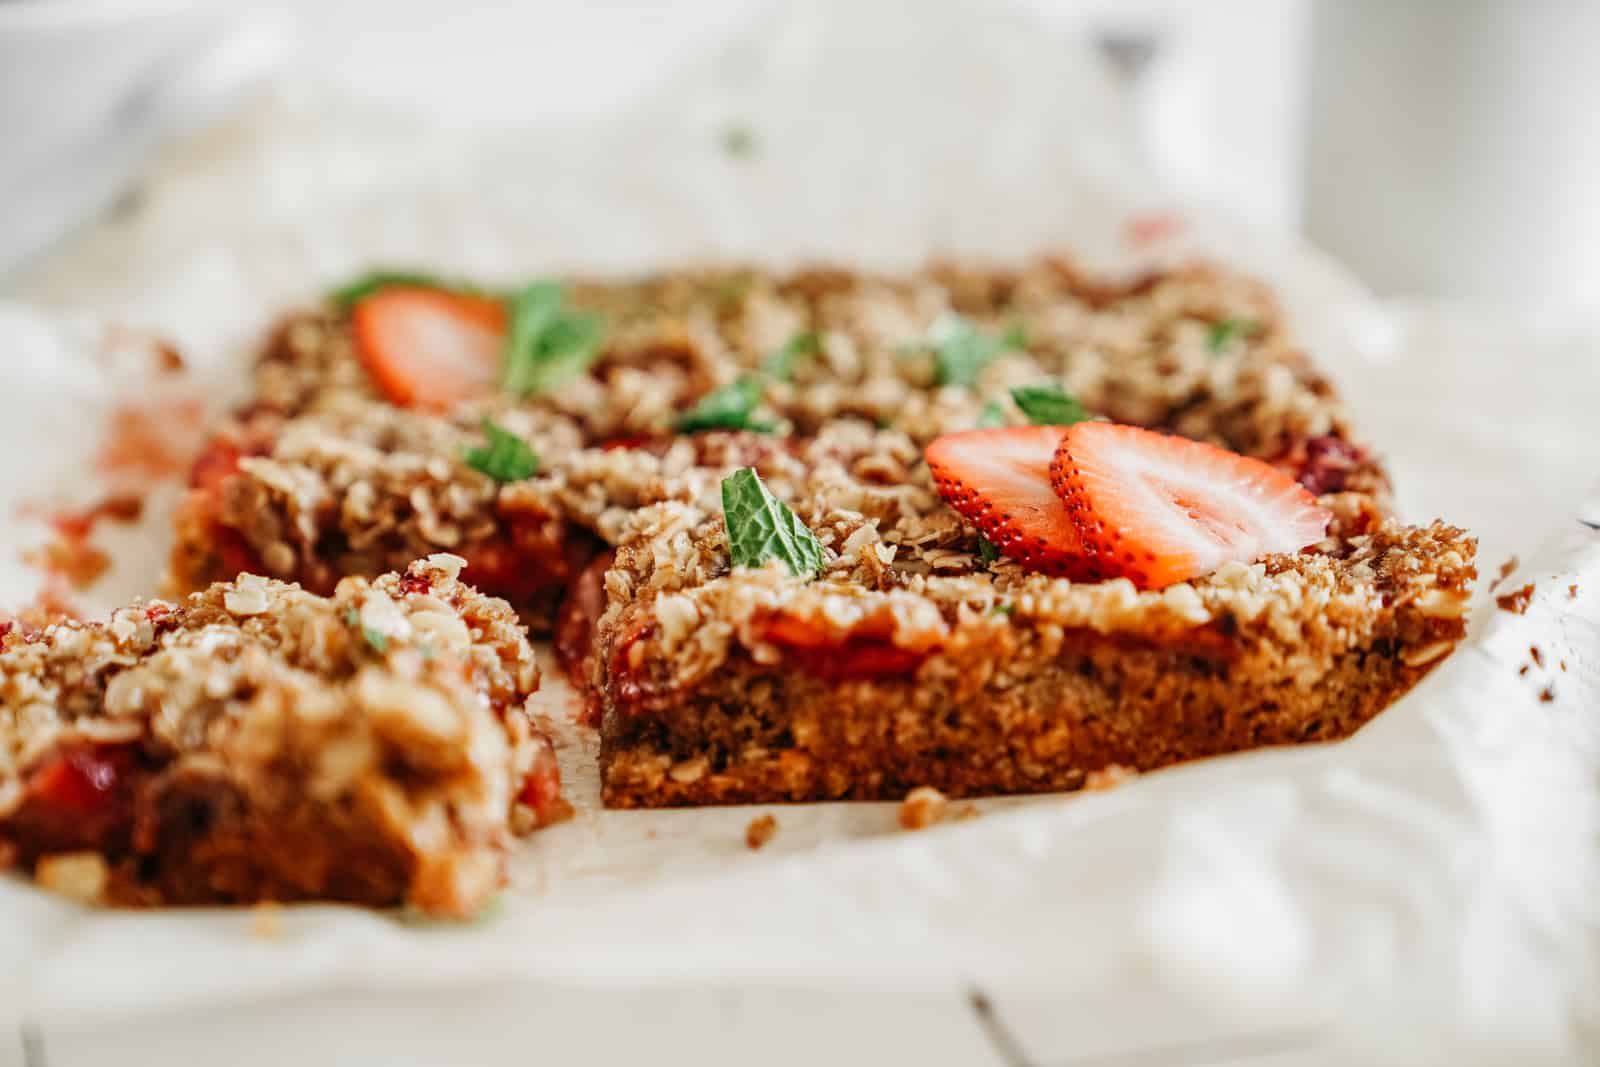 Vegan Strawberry Crumble Bars up-close and personal